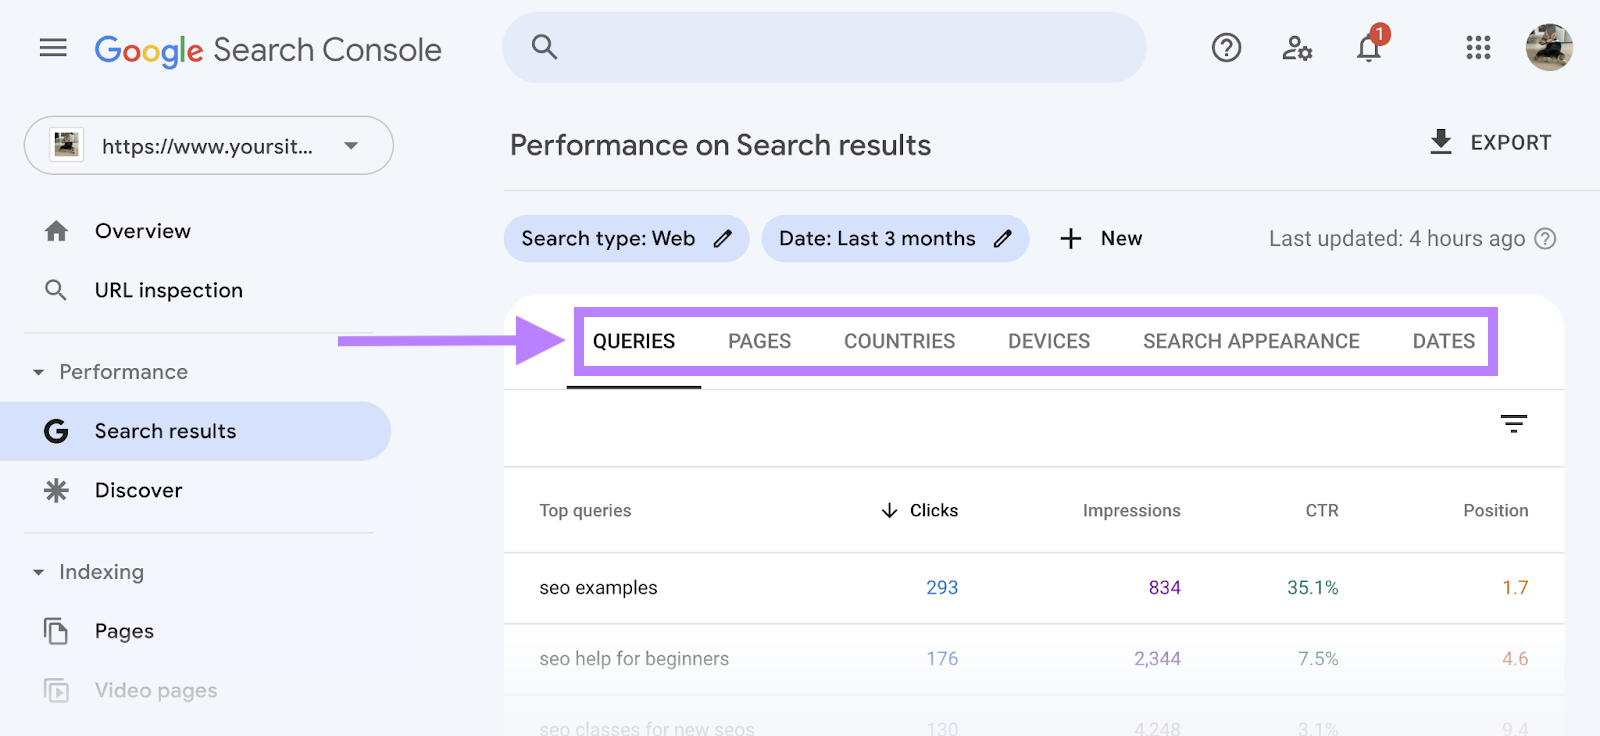 Google Search Console performance on search results report